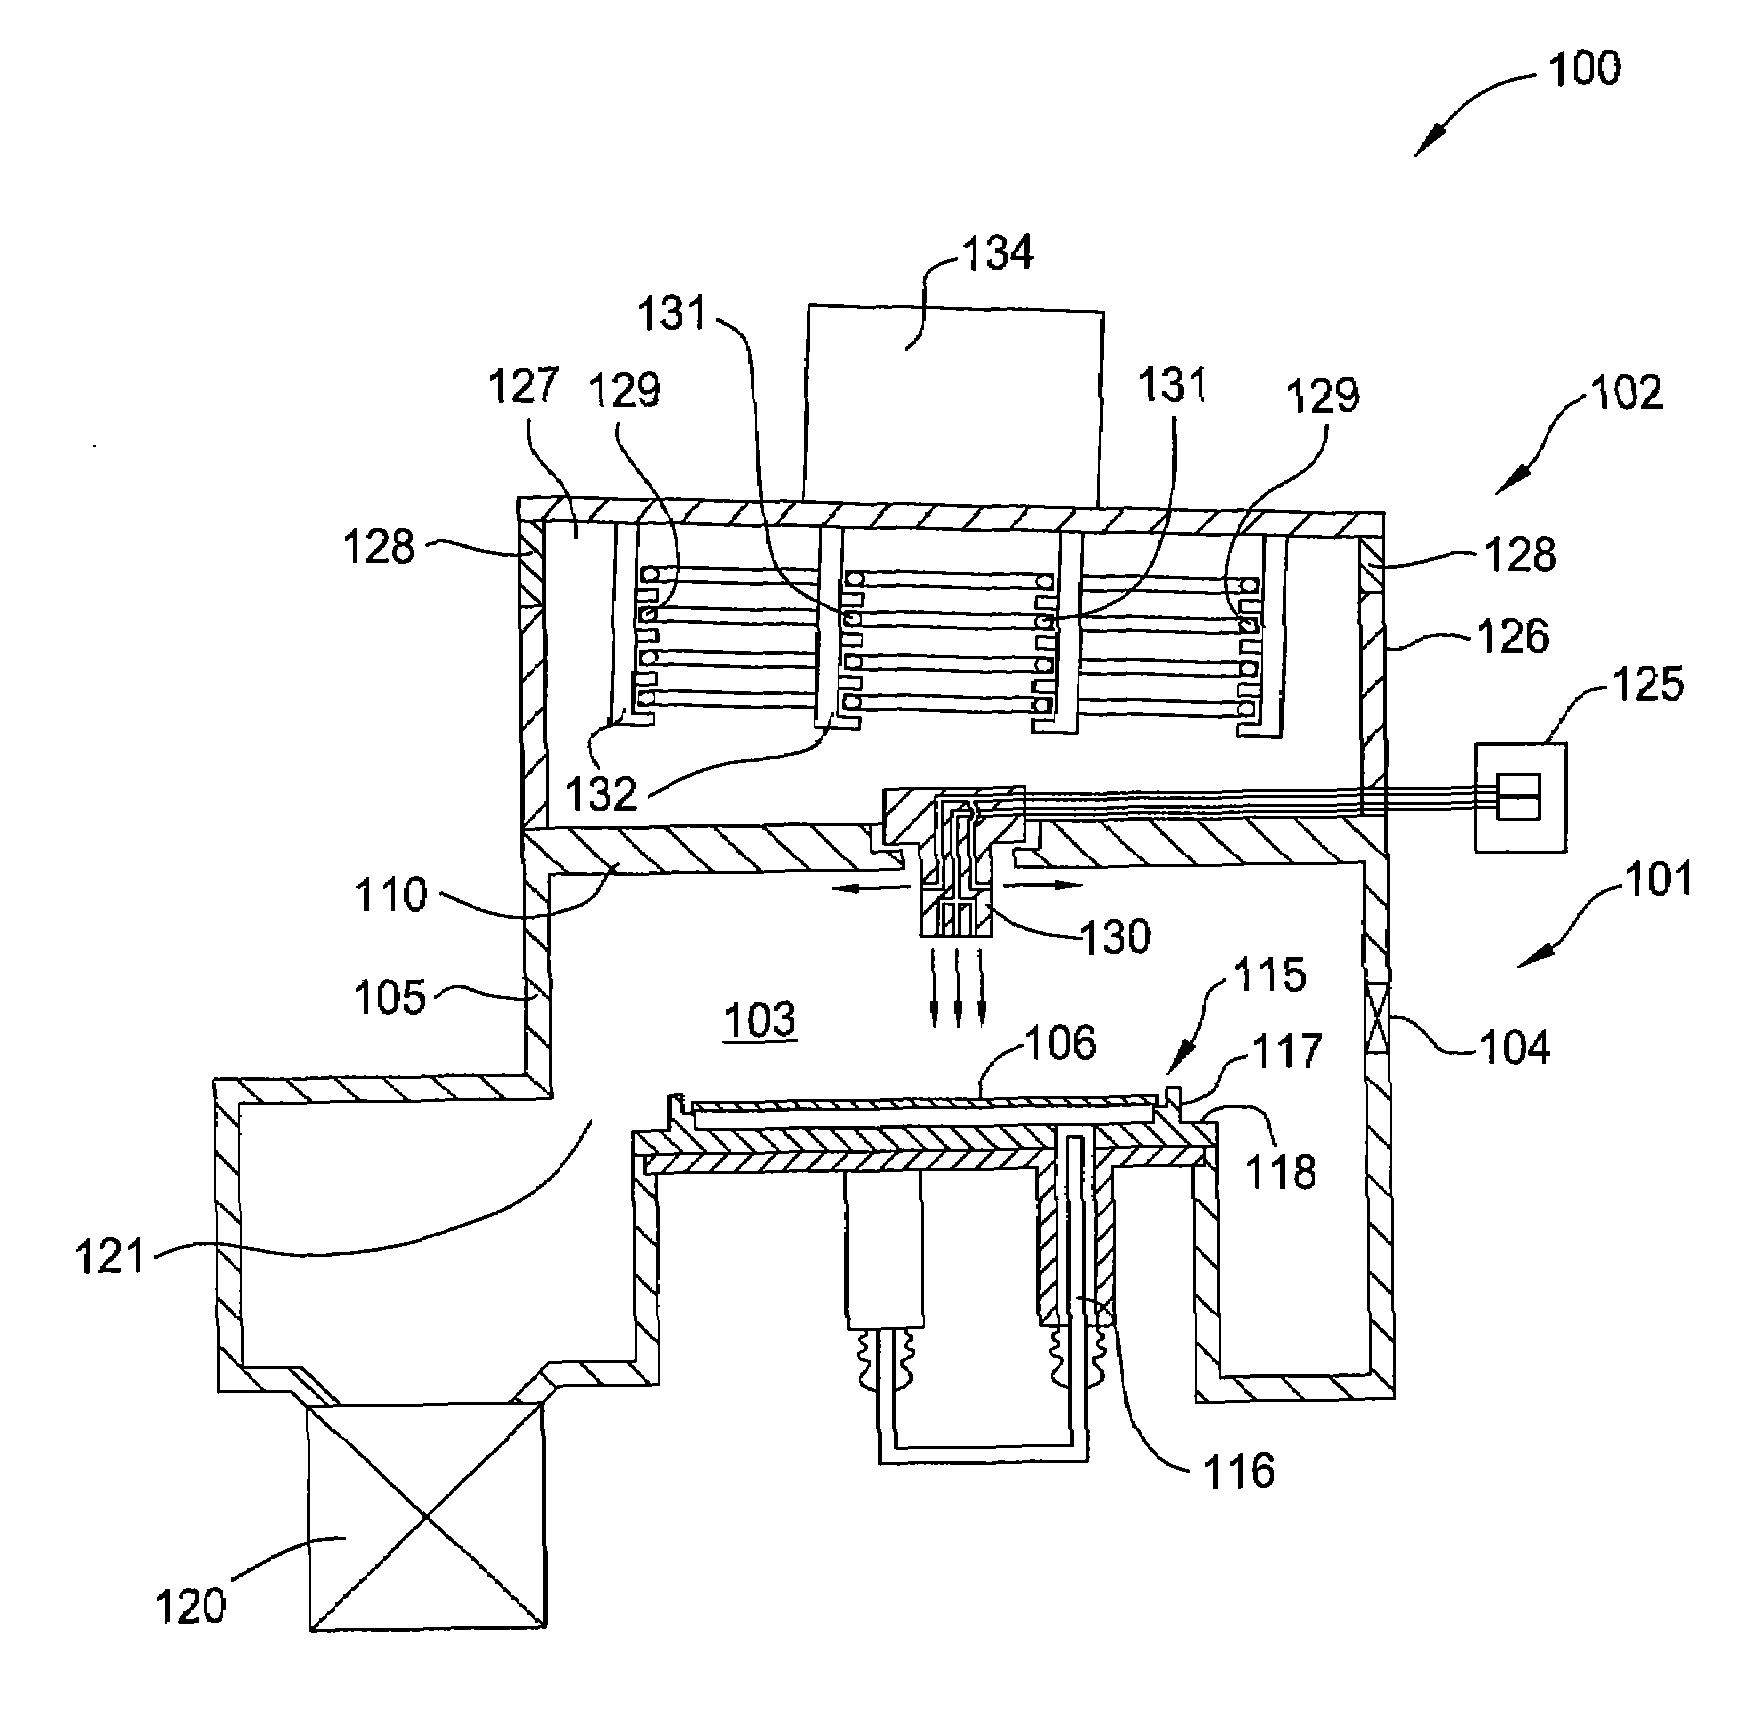 Apparatus and method for processing a substrate using inductively coupled plasma technology